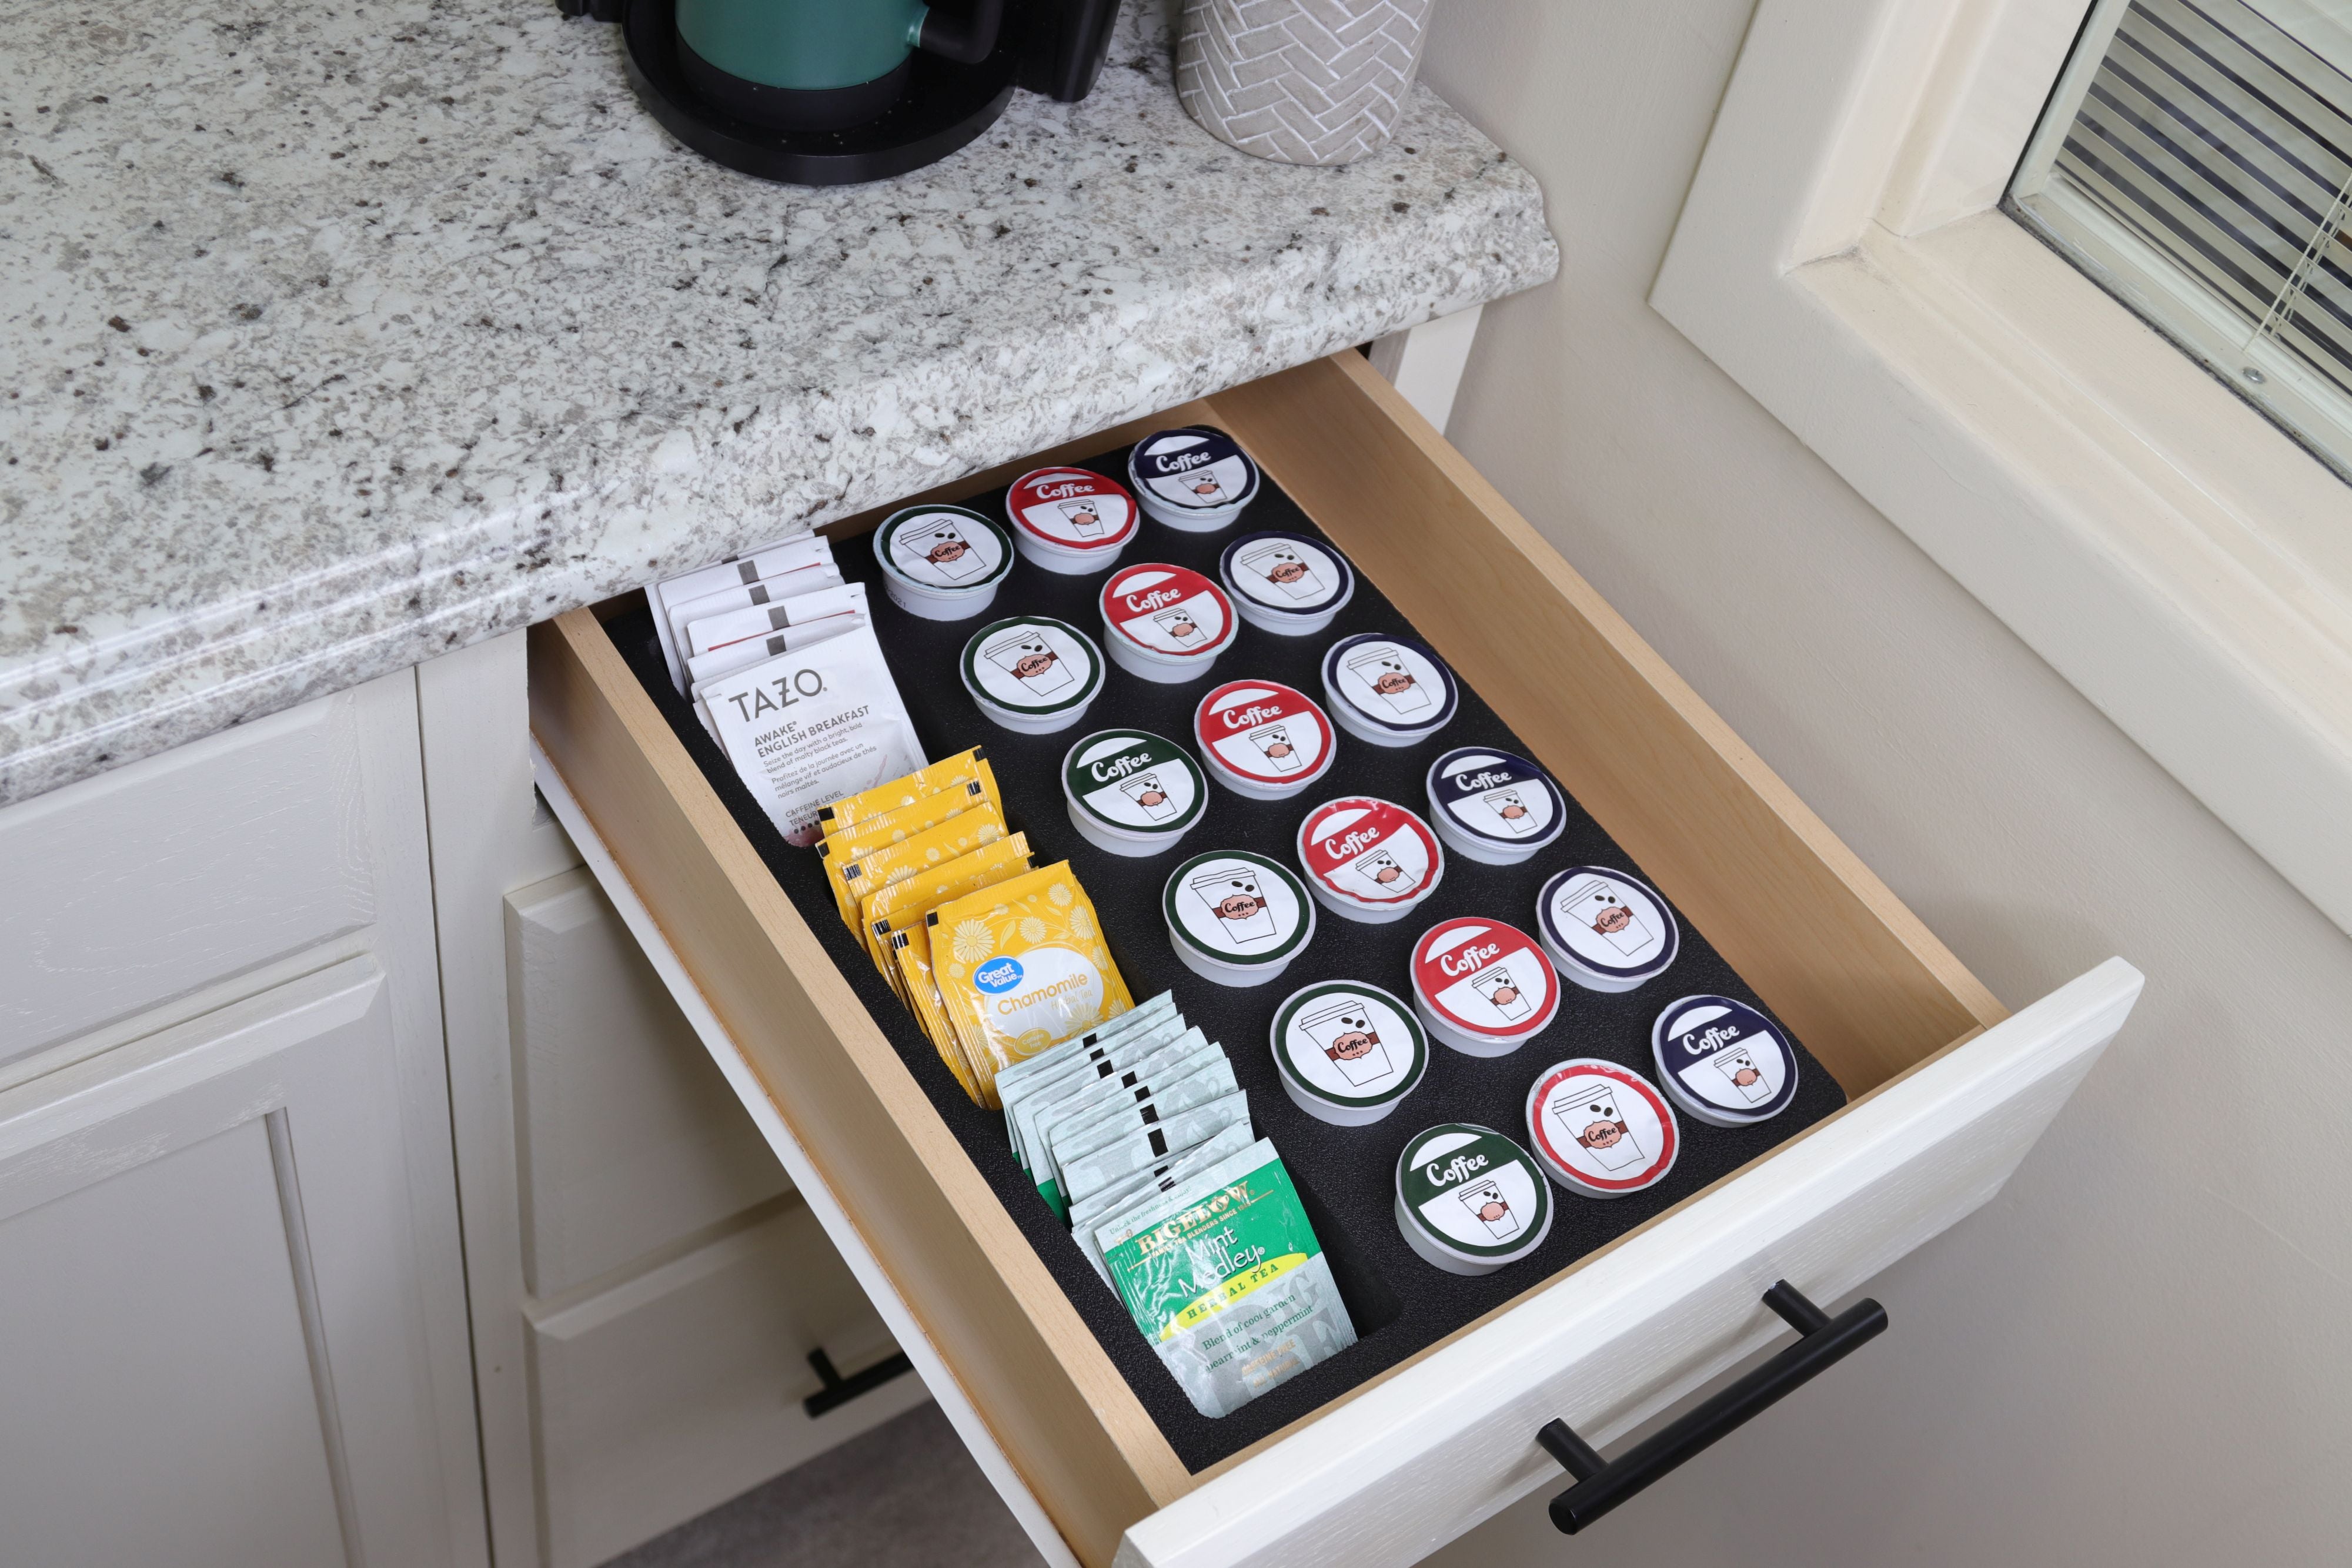 Coffee Pod and Tea Bag Storage Organizer Tray Drawer Insert for Kitchen Home Office 10.9 x 14.9 Inches Holds 18 Compatible with Keurig K-Cup